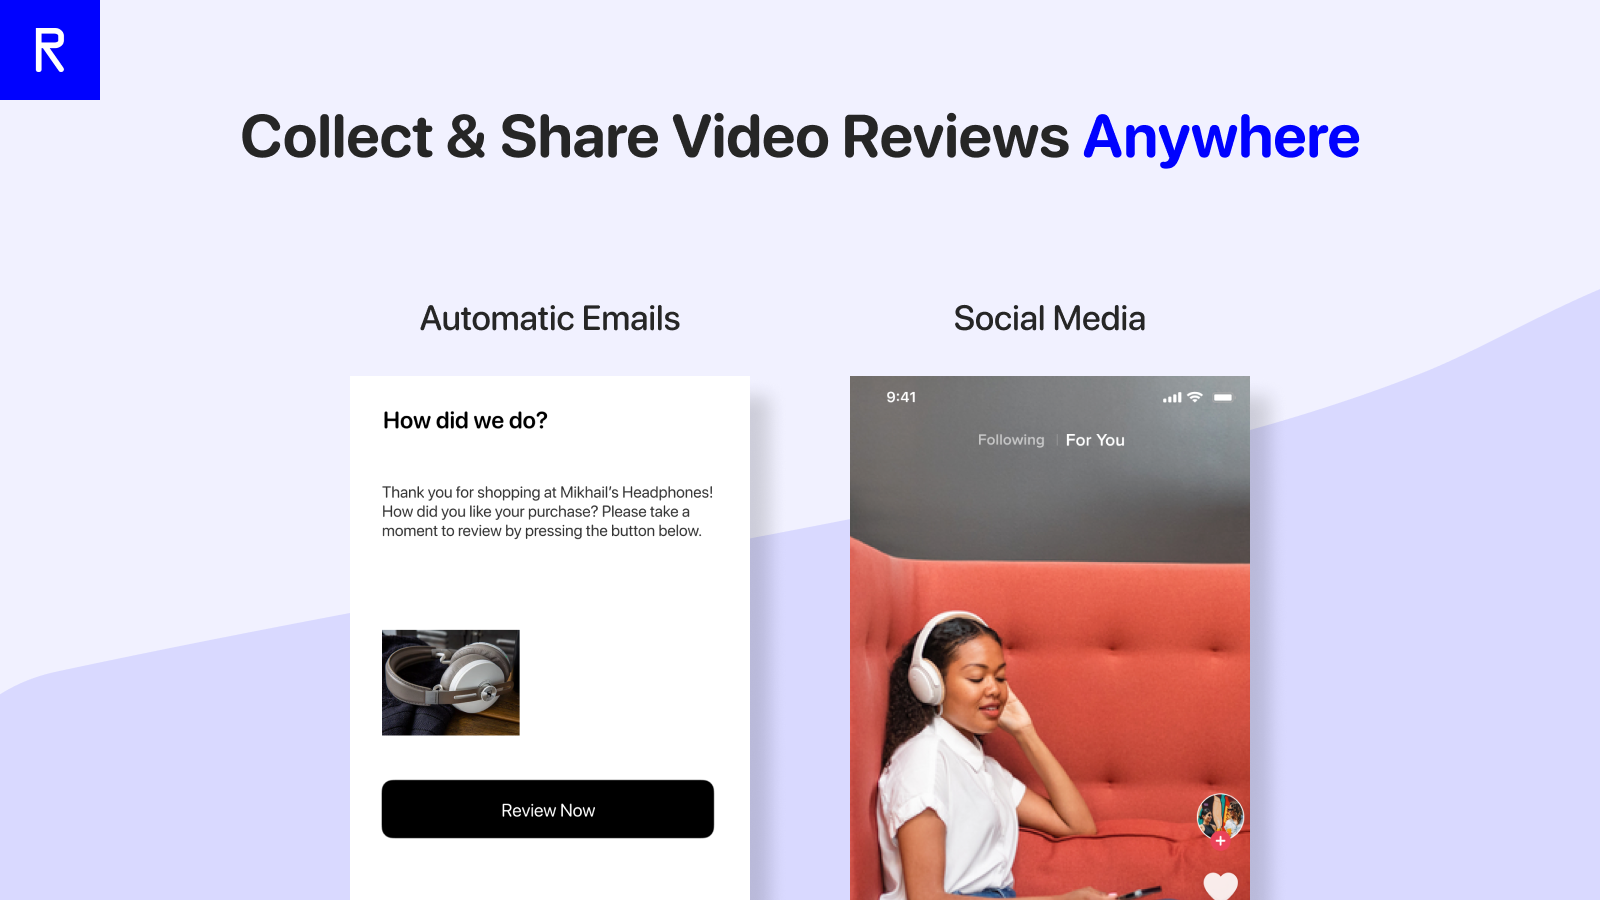 Easily Collect & Share Video Reviews. Anywhere.